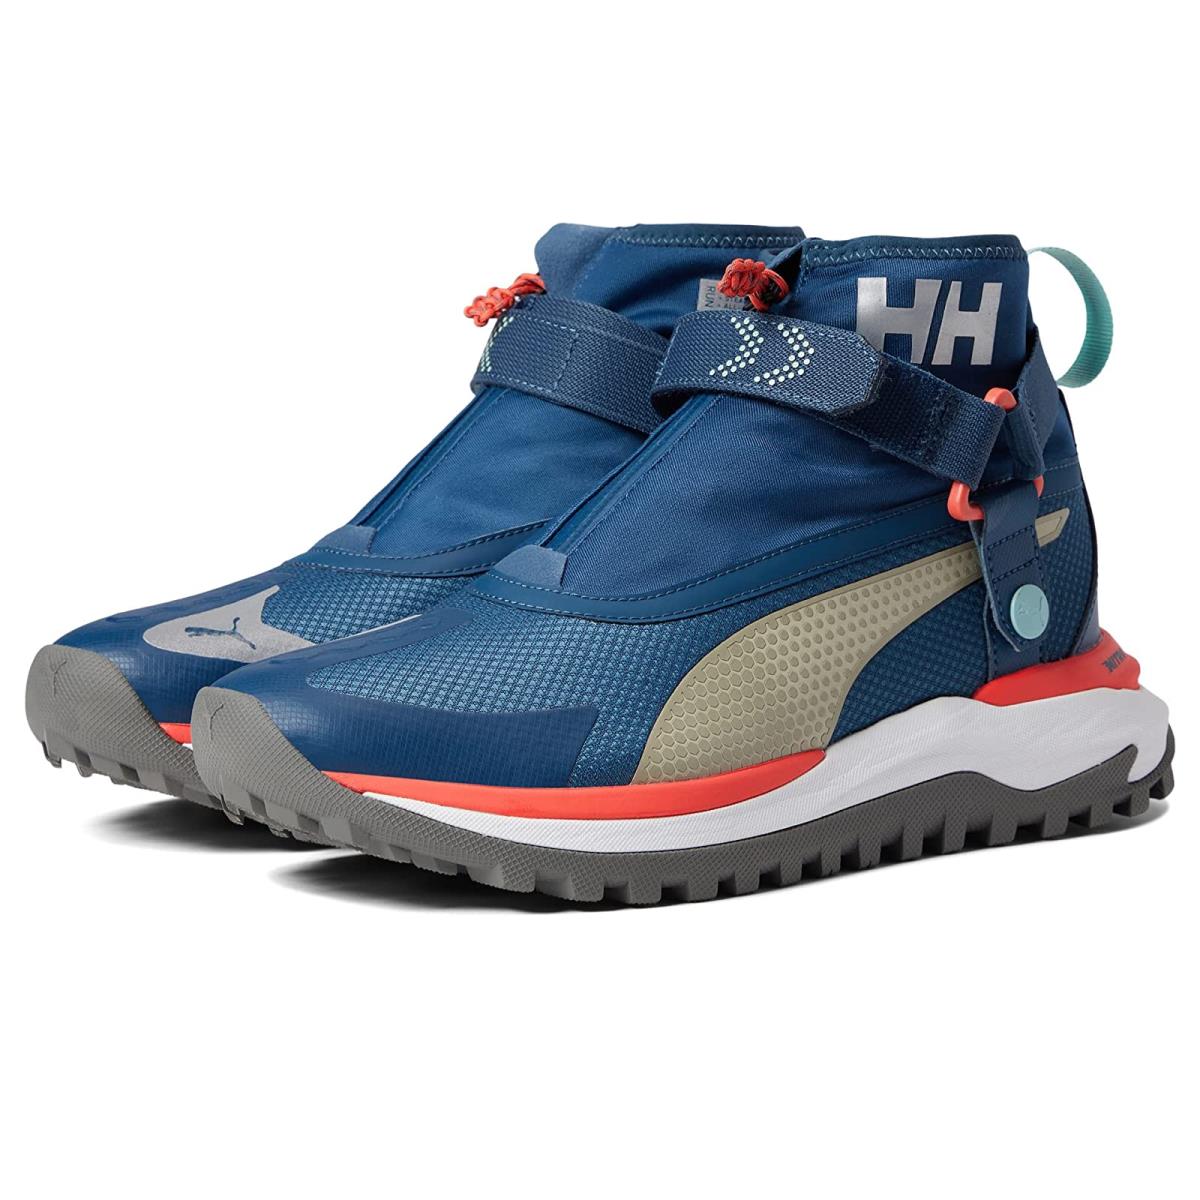 Man`s Sneakers Athletic Shoes Puma Voyage Nitro Helly Hansen Intense Blue/Hot Coral/Spray Green